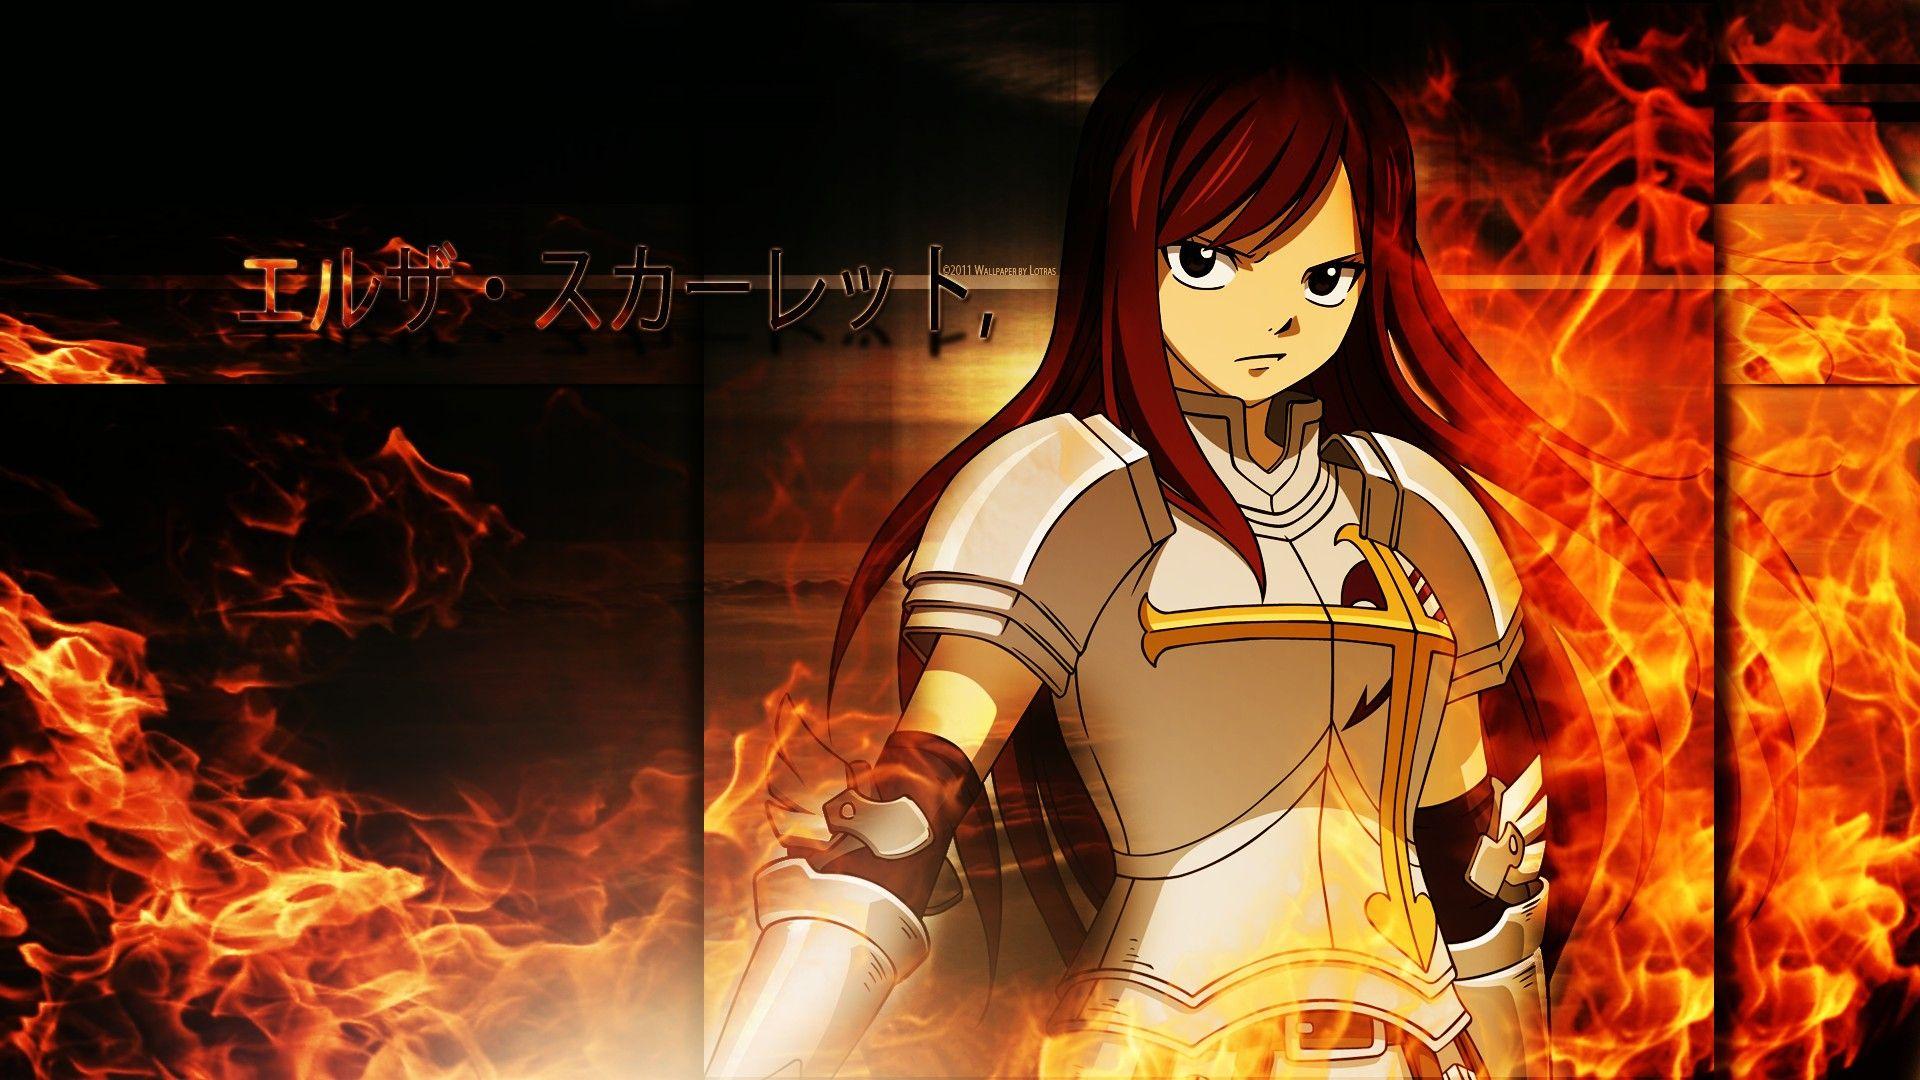 Erza Scarlet Fairy Tail Anime Mobile Wallpaper Samsung Mobile Wallpapers   फट शयर